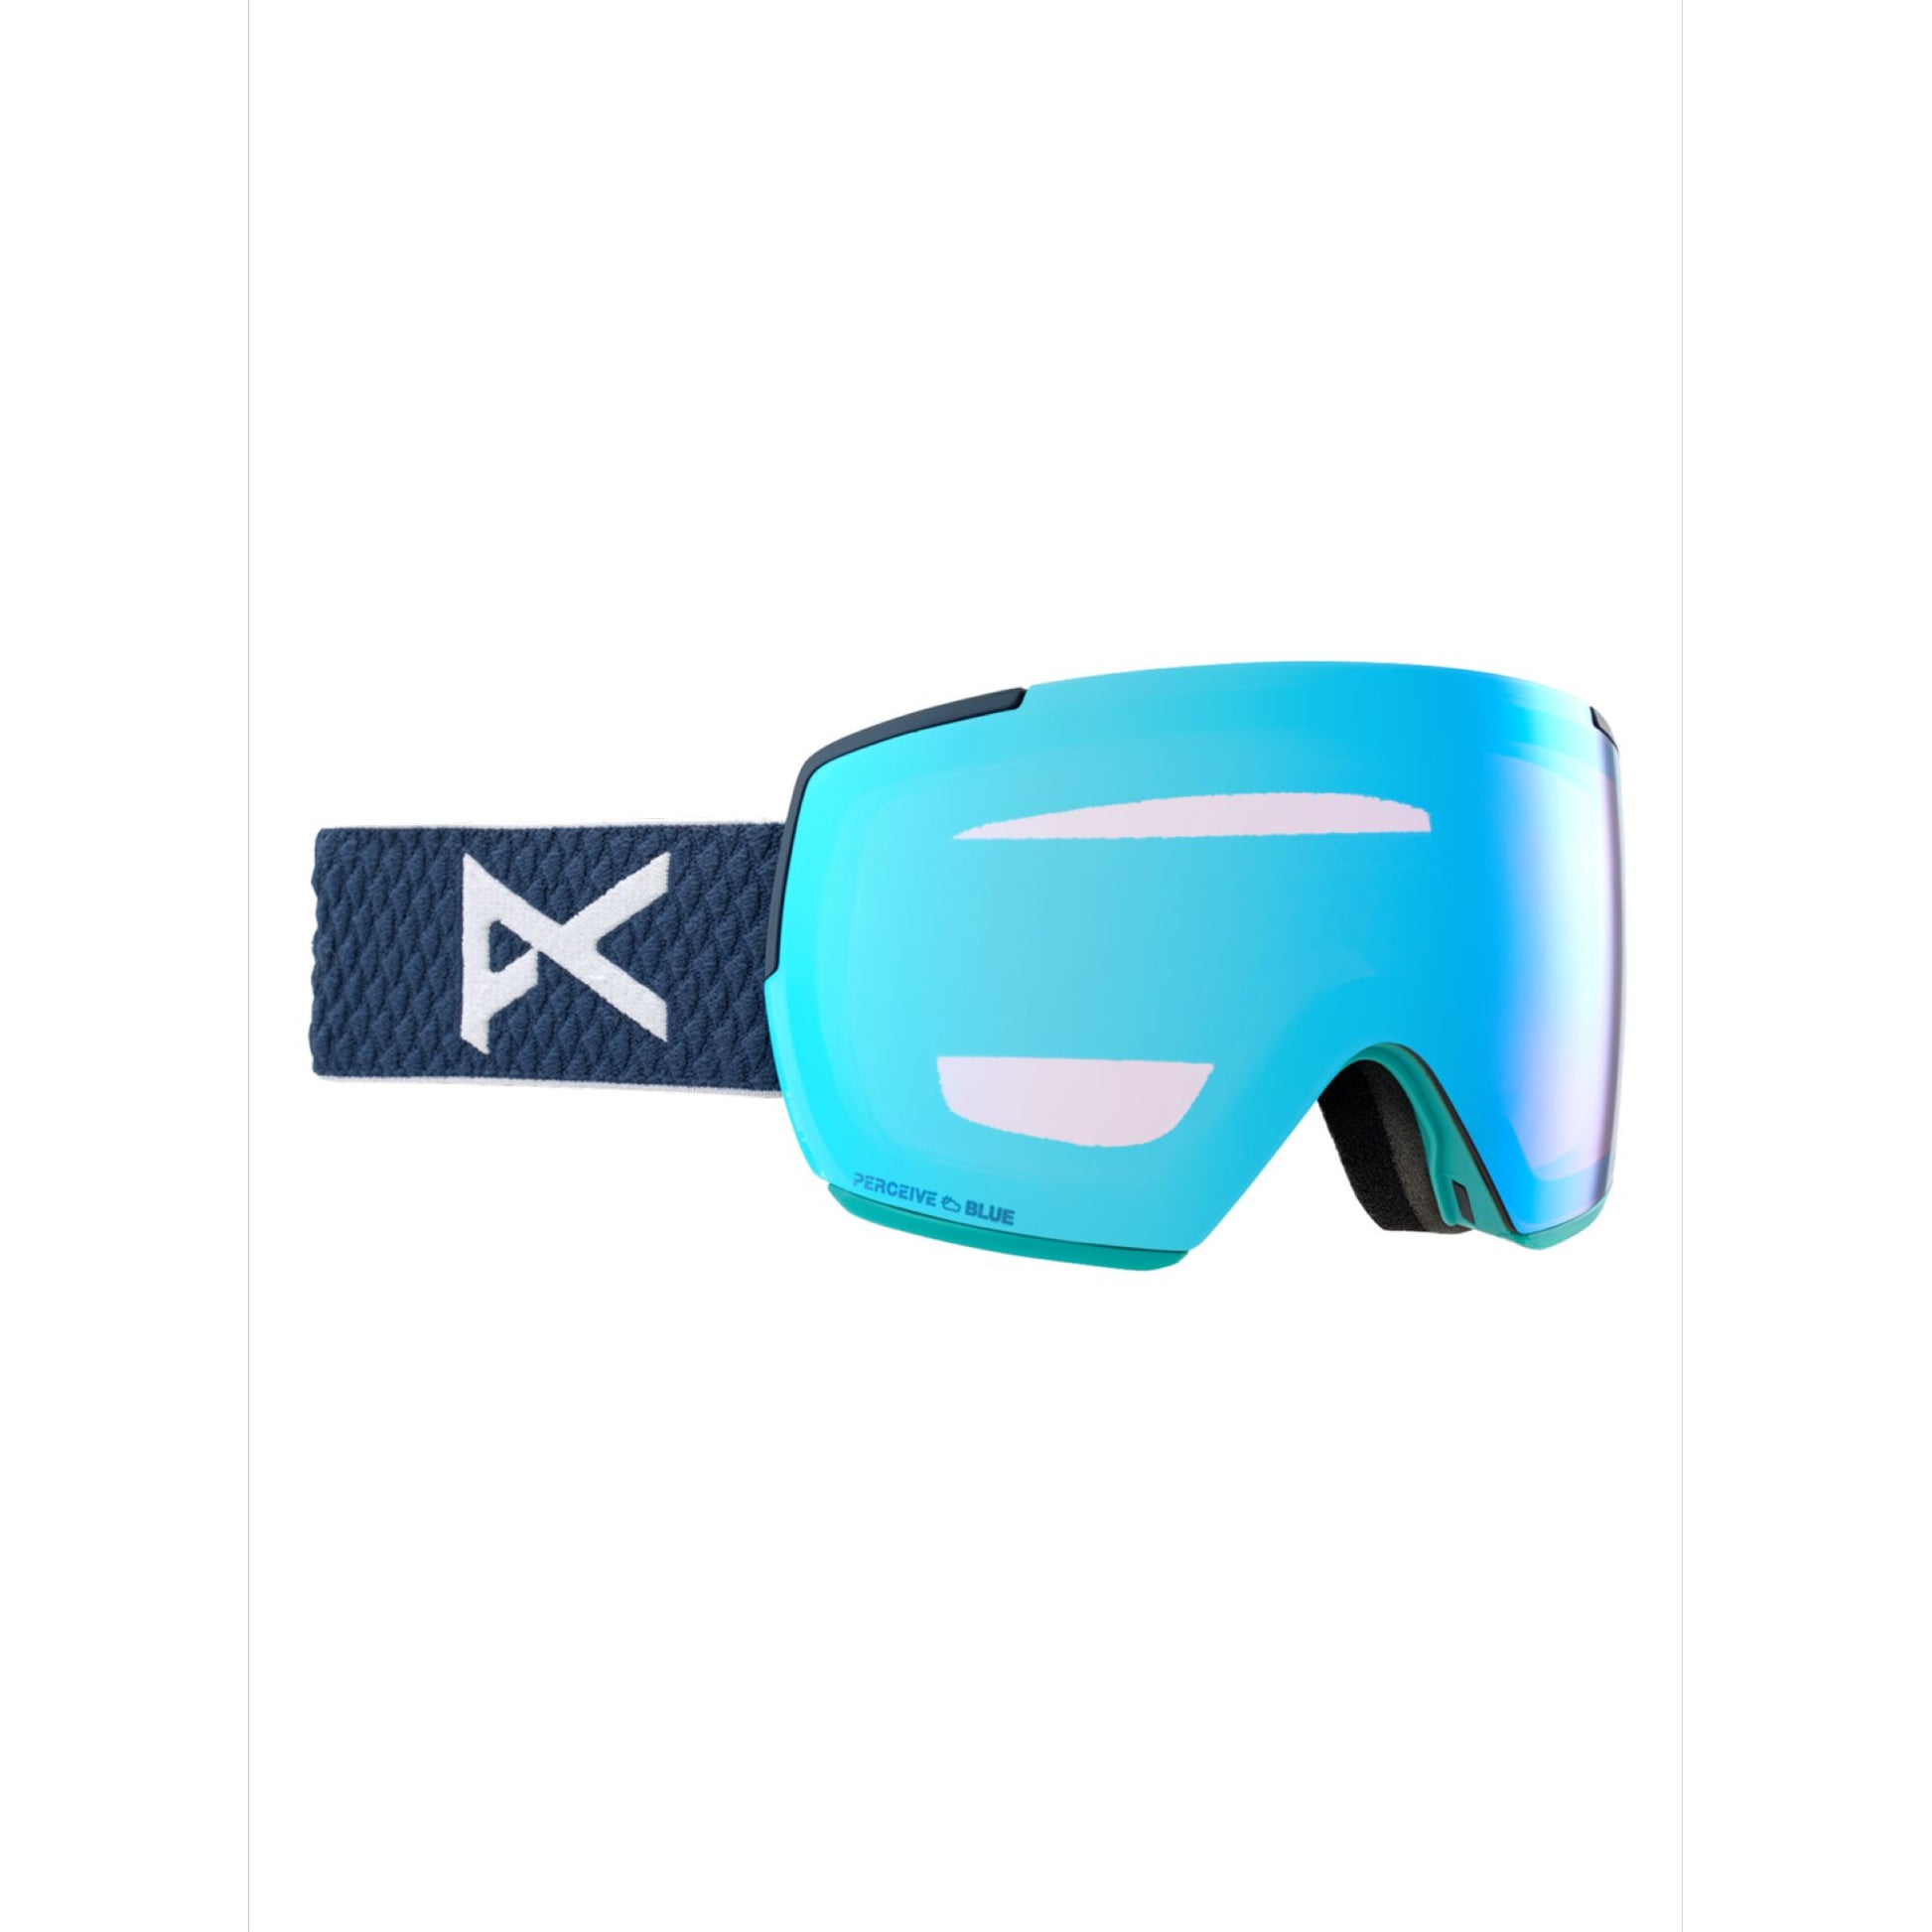 Anon M5 Snow Goggles Nightfall Perceive Variable Blue Snow Goggles